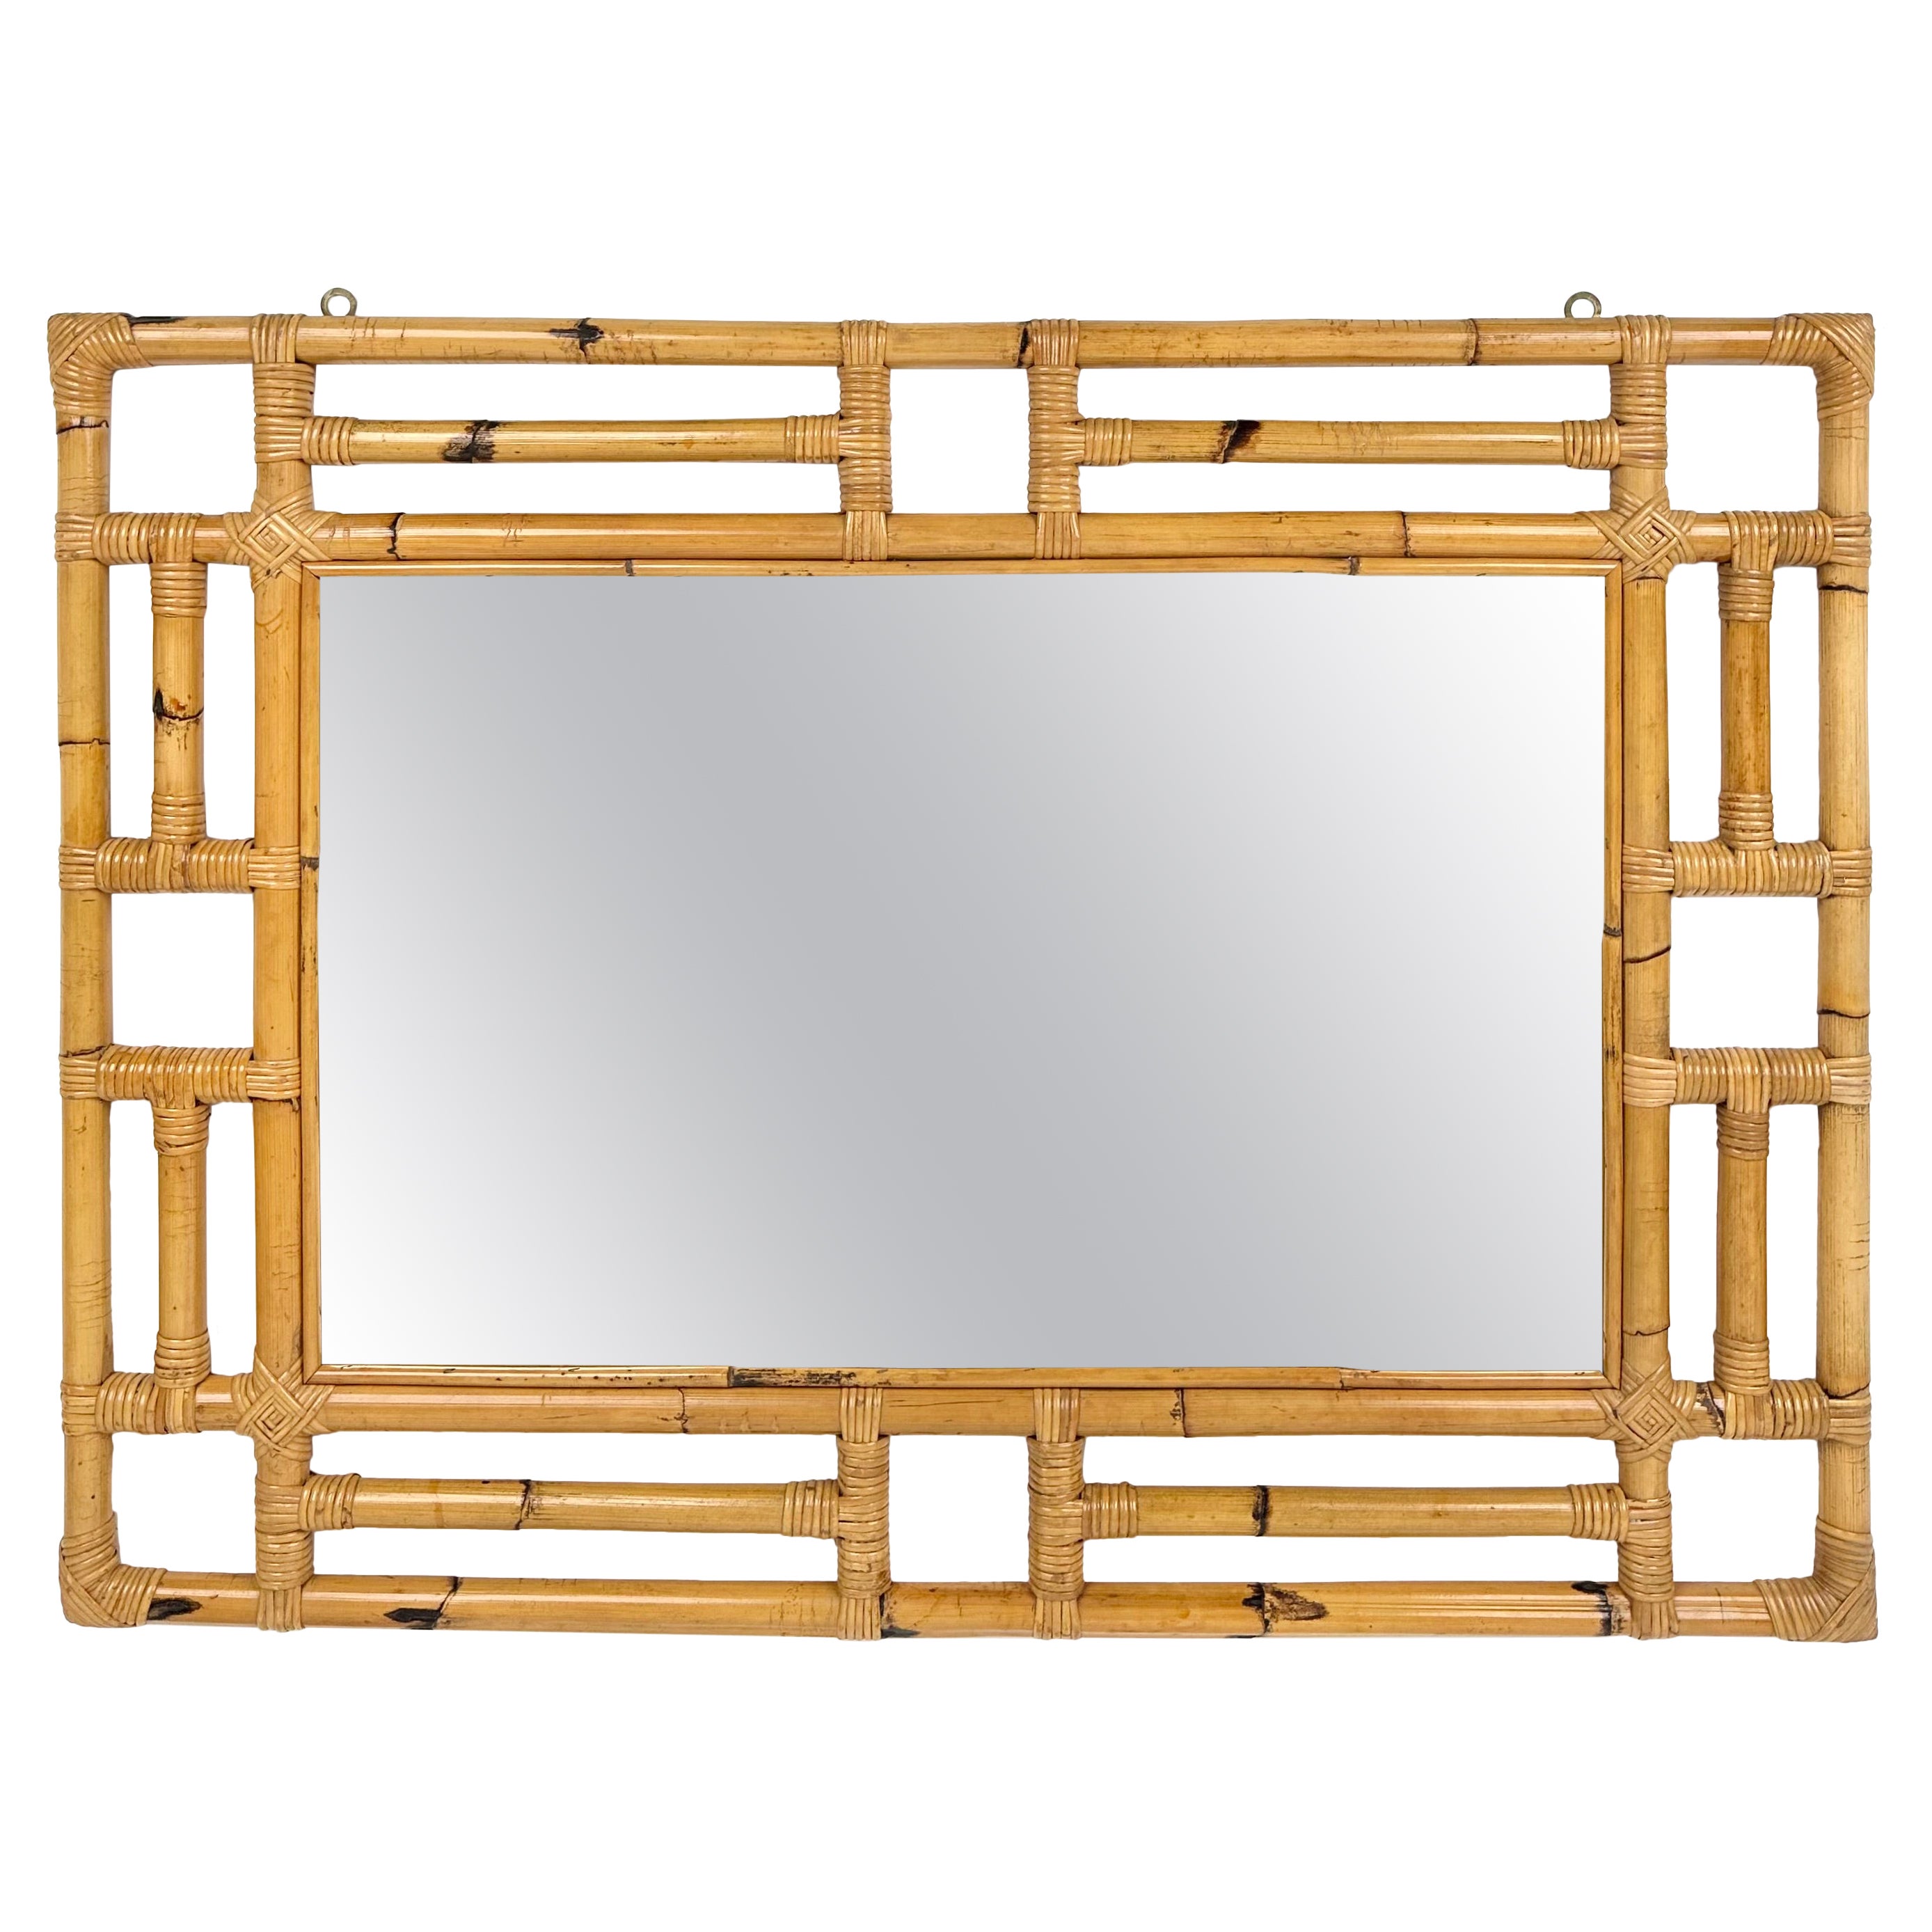 Rectangular Wall Mirror in Bamboo and Rattan Vivai del Sud Style, Italy 1970s For Sale